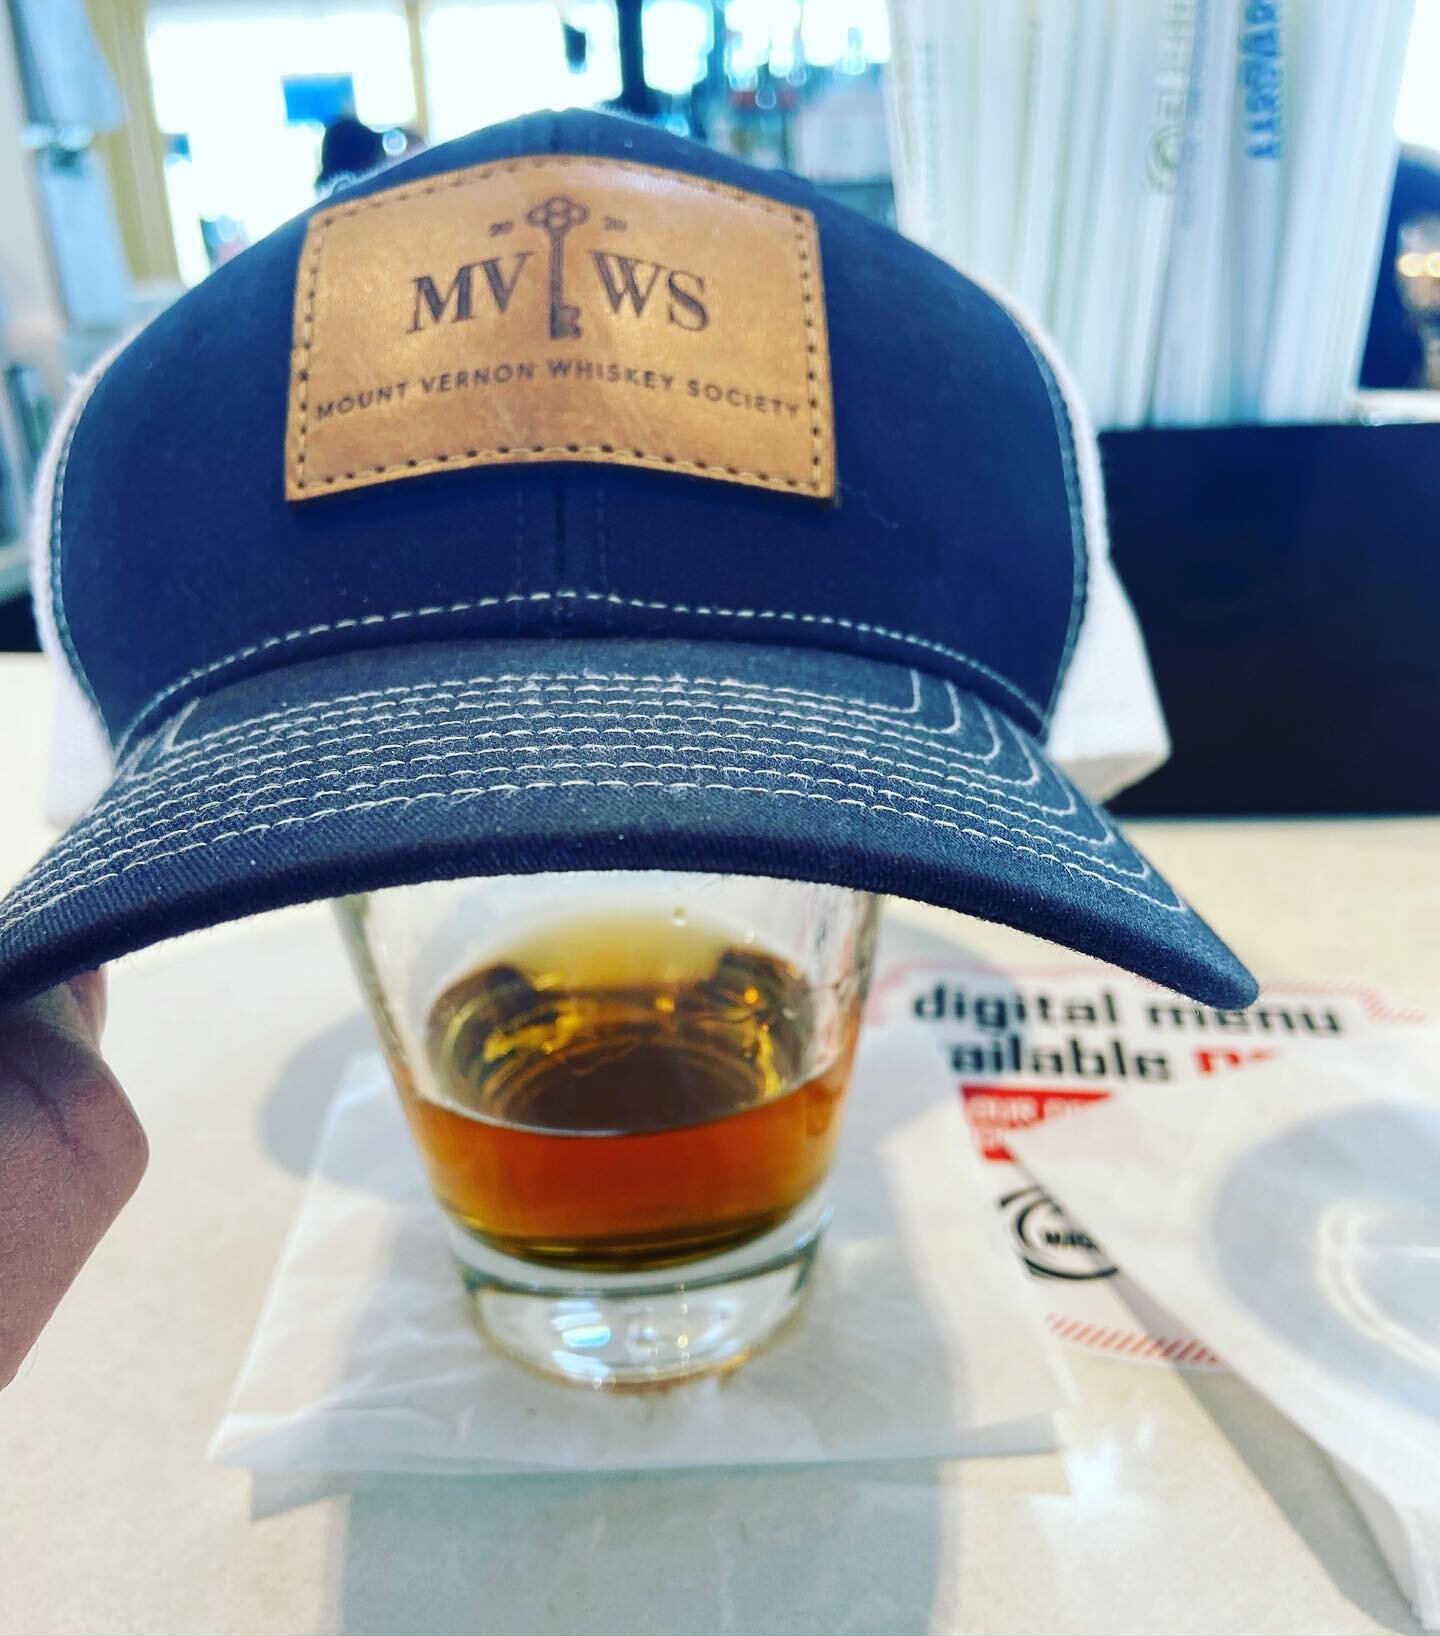 Airport rules apply.  No time for a mimosa or Bloody Mary.  Just the good stuff, and this is some smooth @knobcreek before a flight.